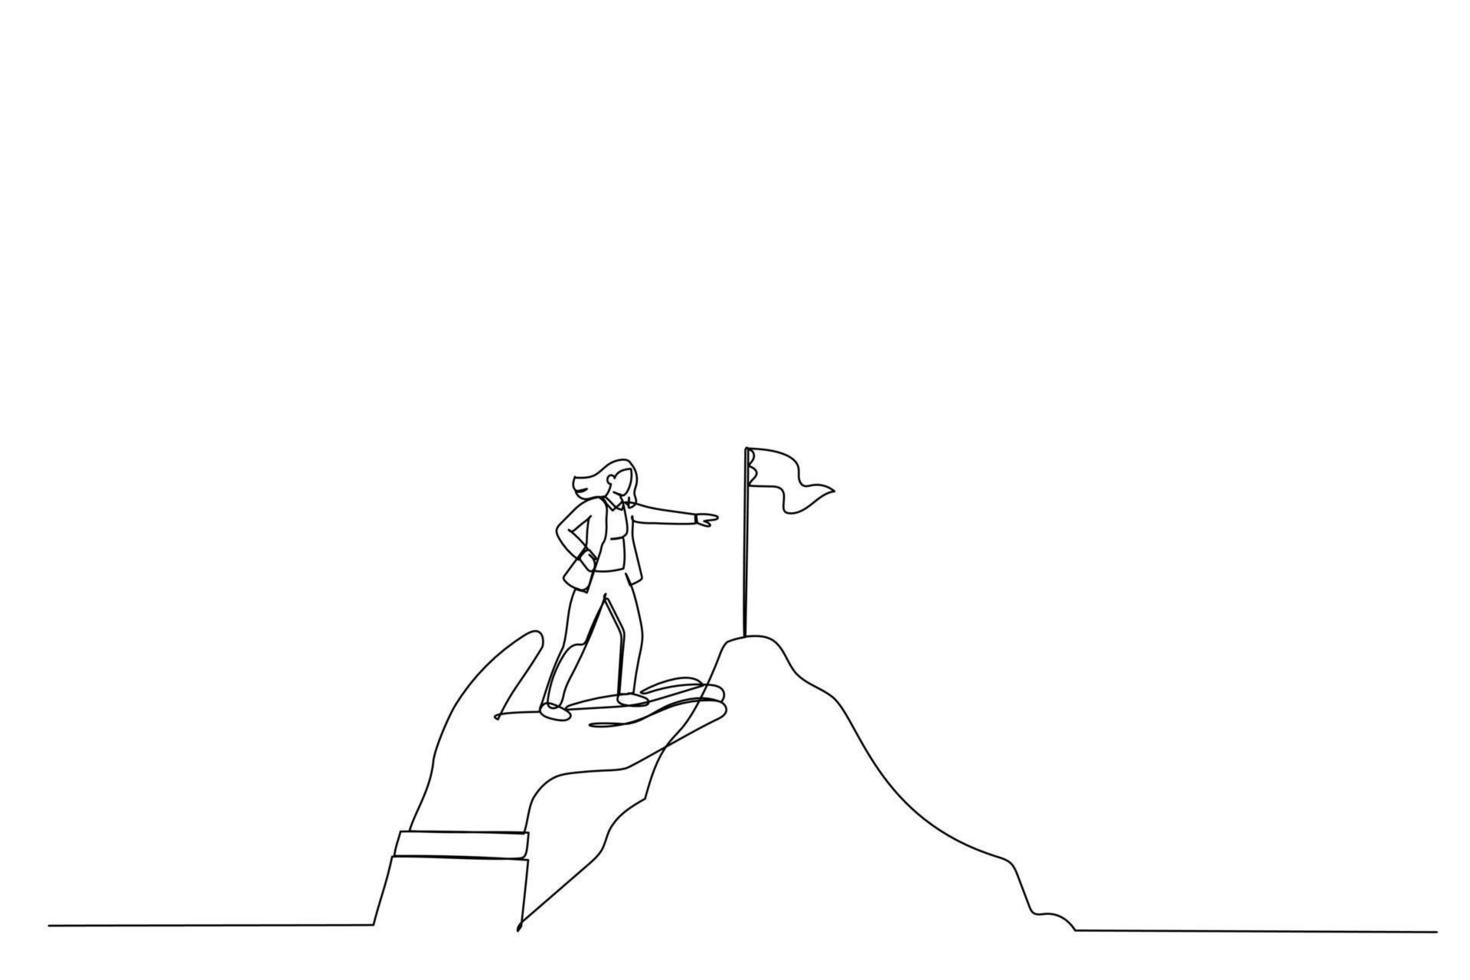 Drawing of businesswoman stand on giant helping hand to reach mountain peak target flag. Single continuous line art style vector